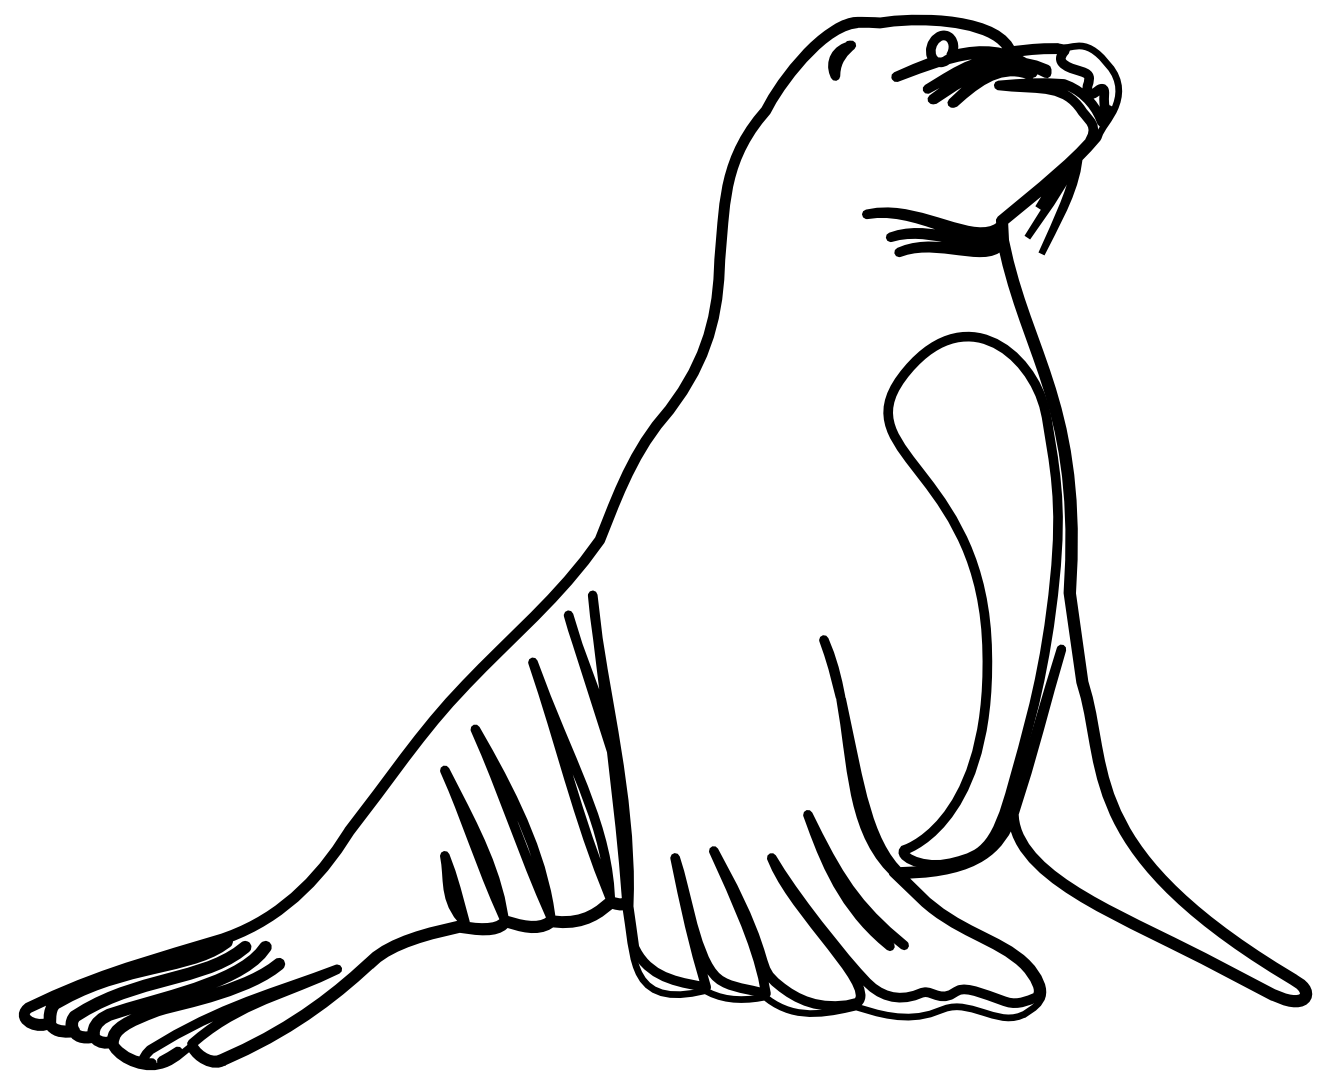 How To Draw A Sea Lion Easily - ClipArt Best